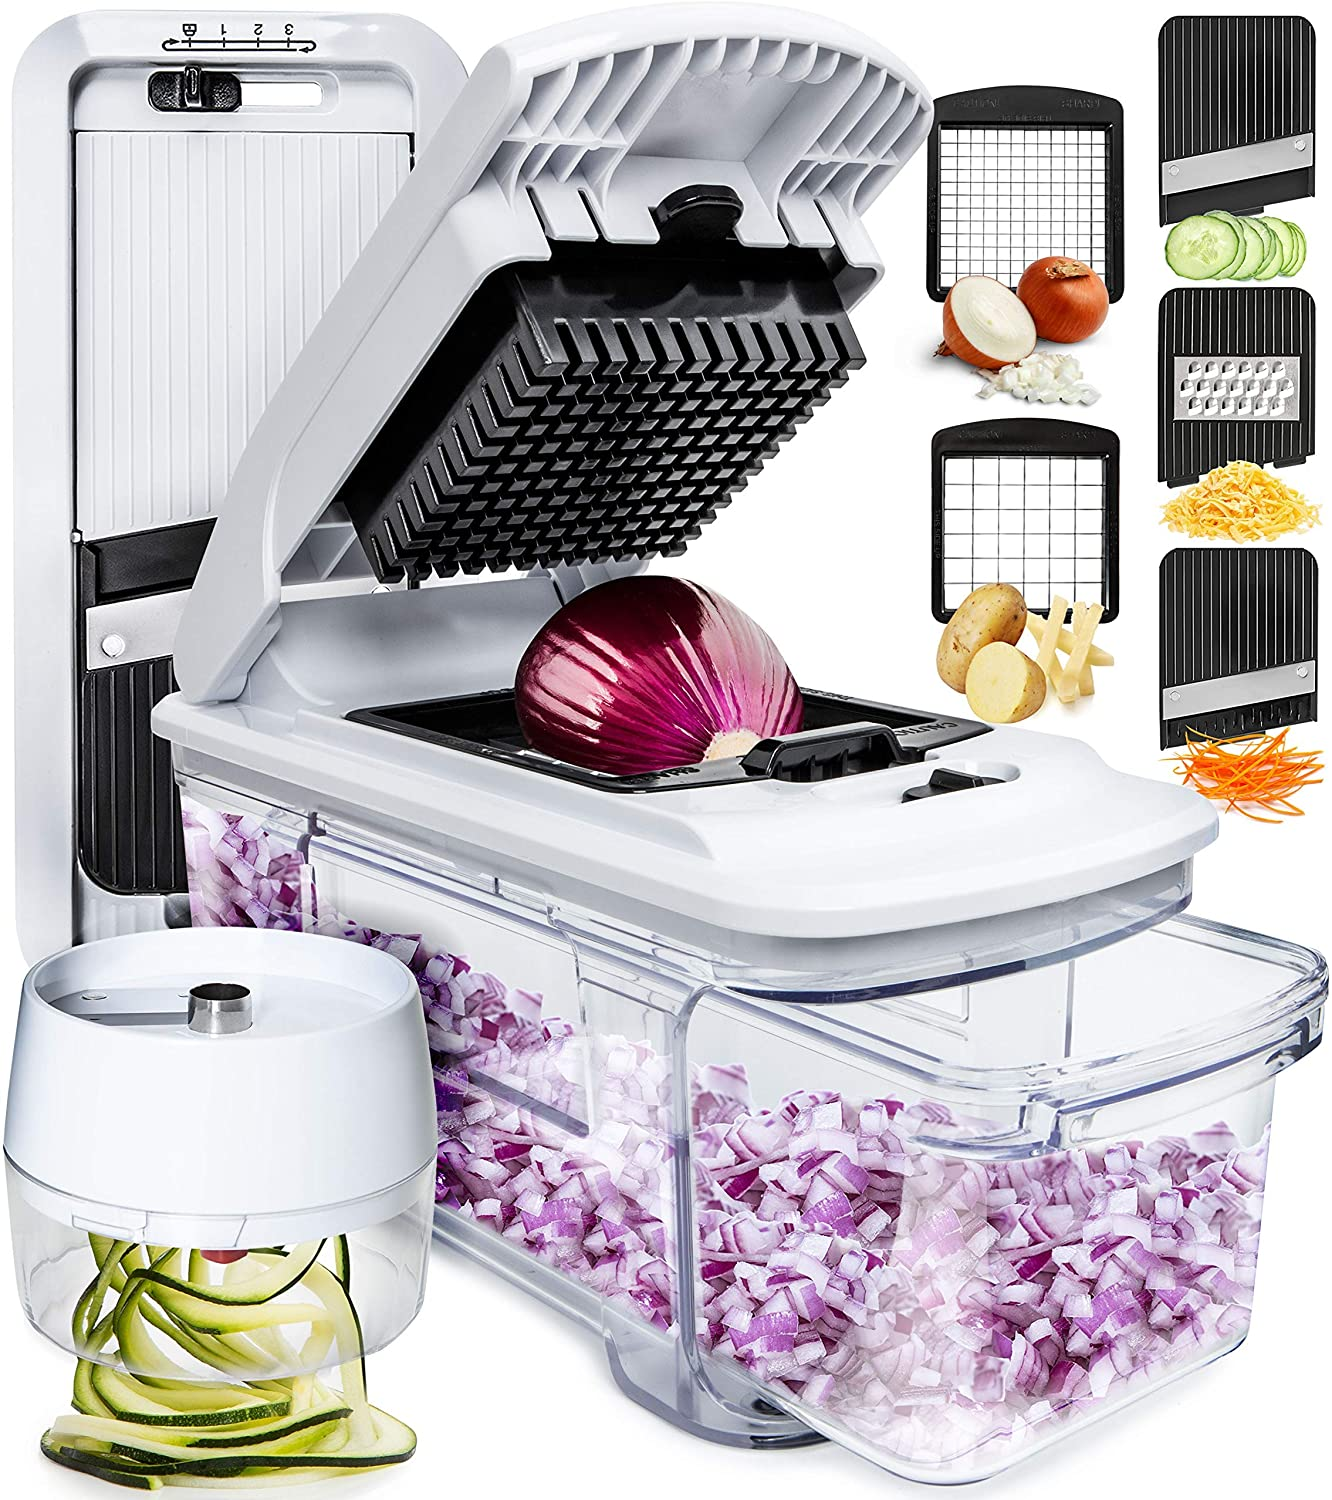 6-in-1 Mandoline Slicer, Cheese Grater, Food Chopper, Food Processors  Kitchen Accessories, 1 - Foods Co.